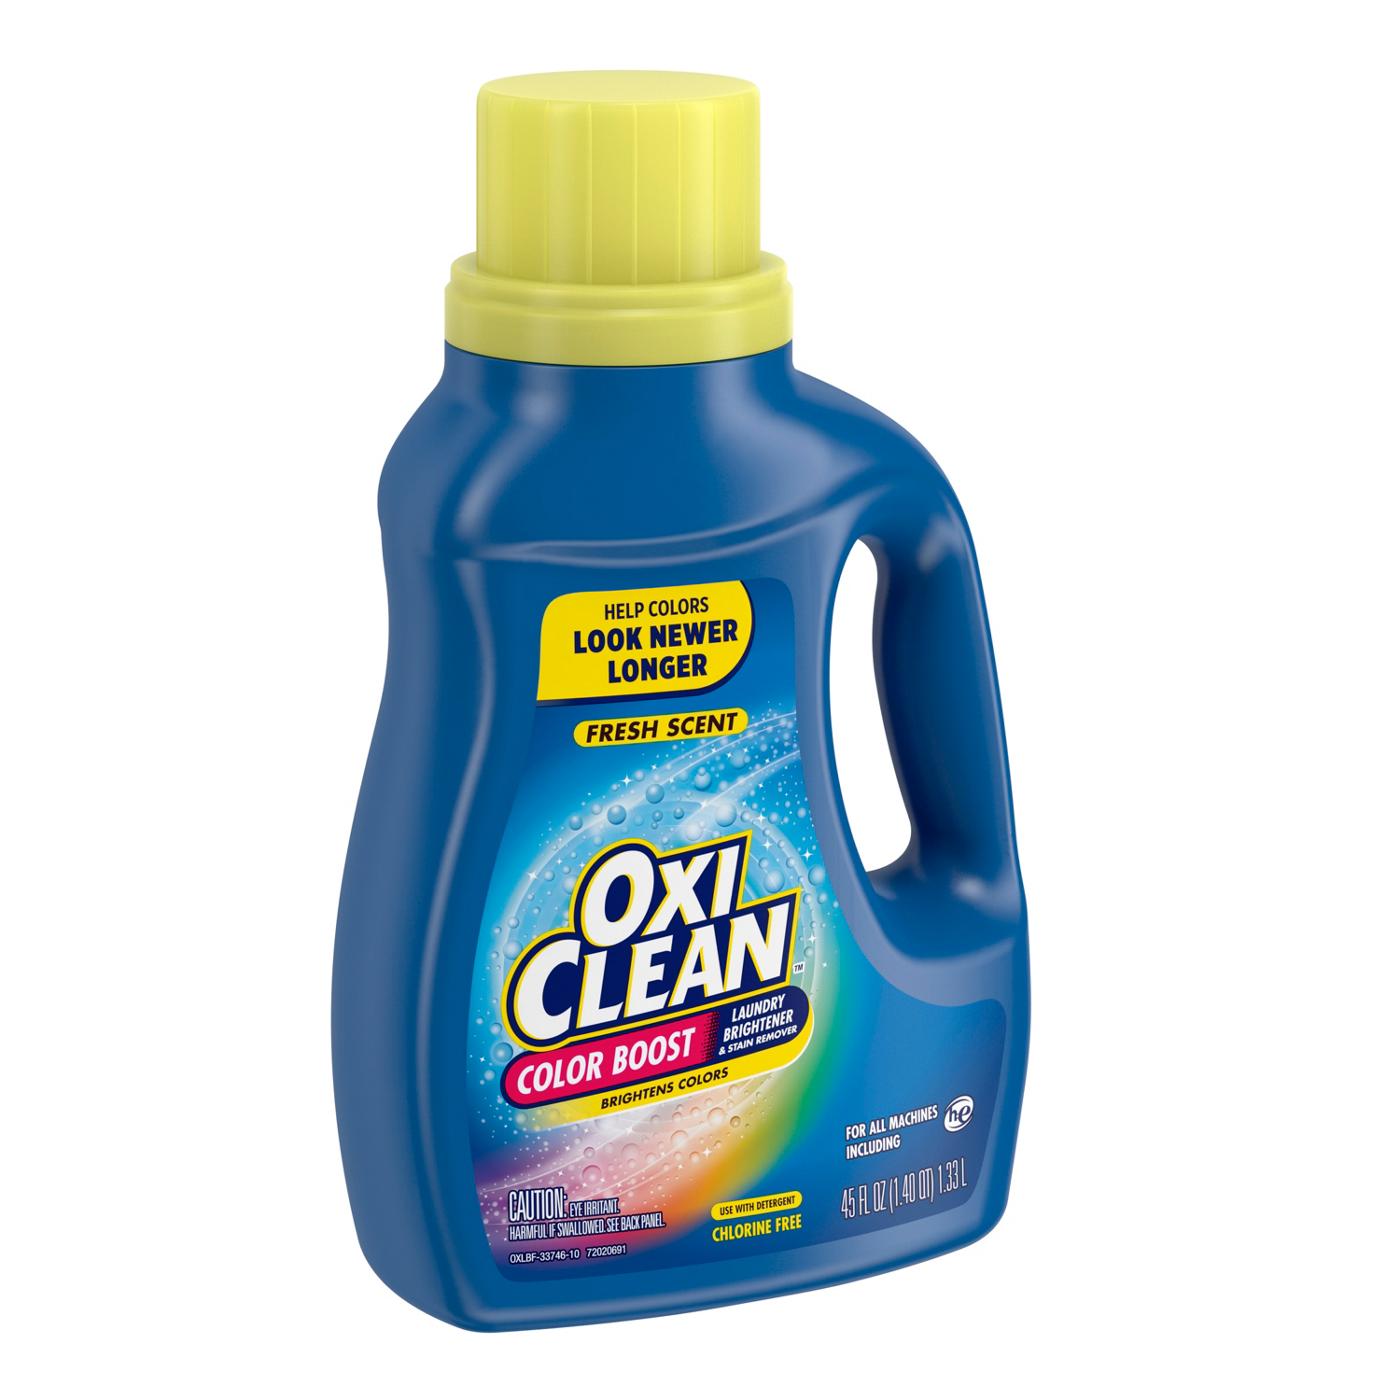 OxiClean Color Boost Fresh Scent Stain Remover; image 2 of 2